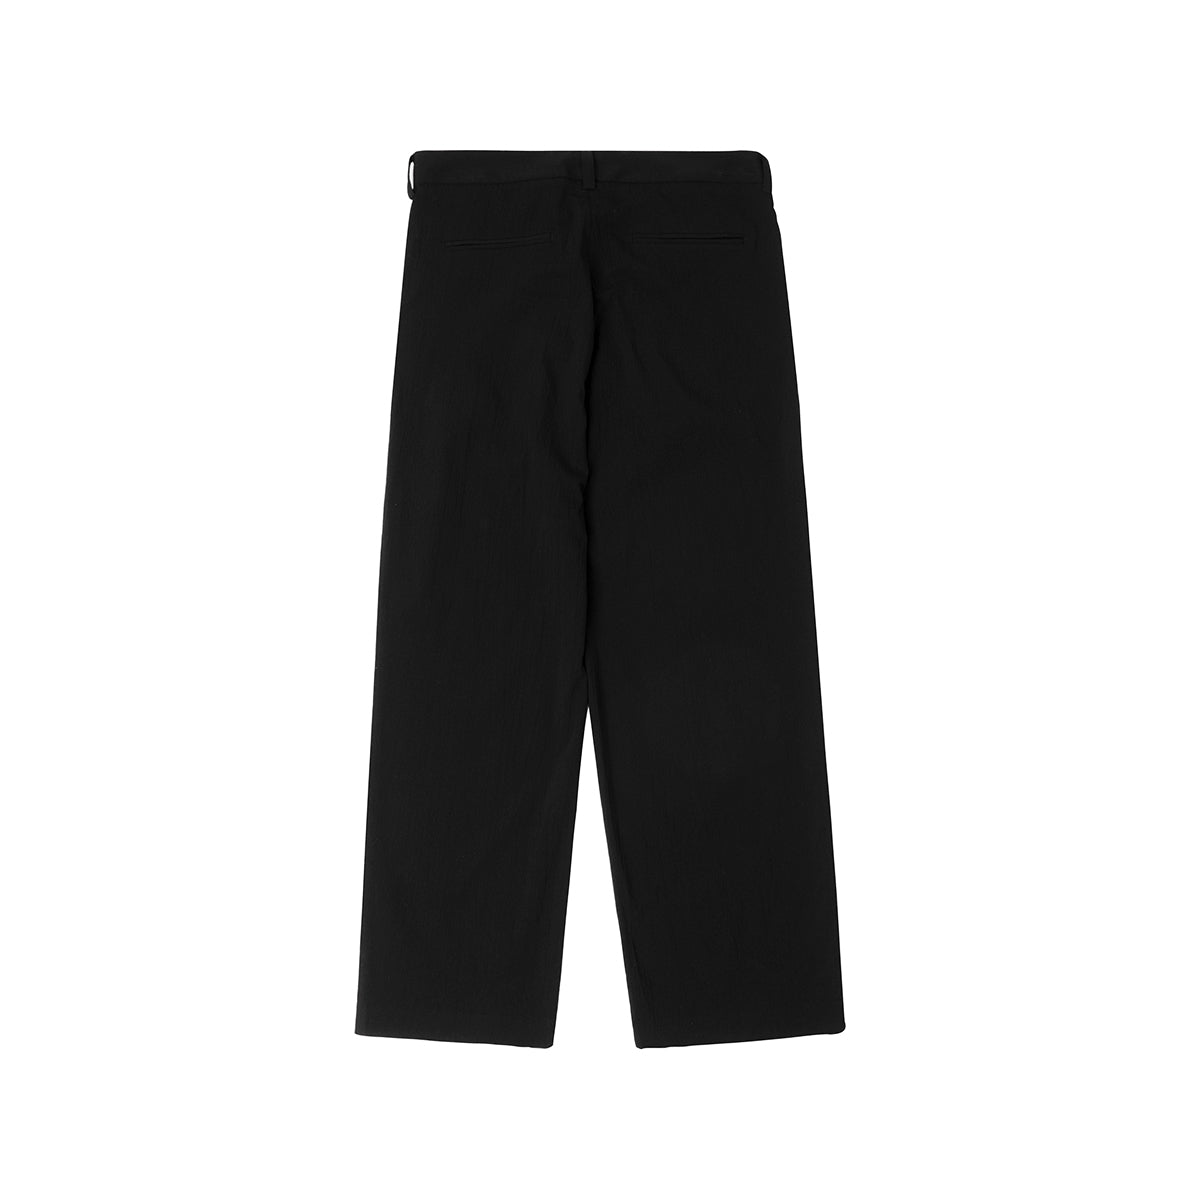 Straight Strap Wide Fit Black Tailored Pants